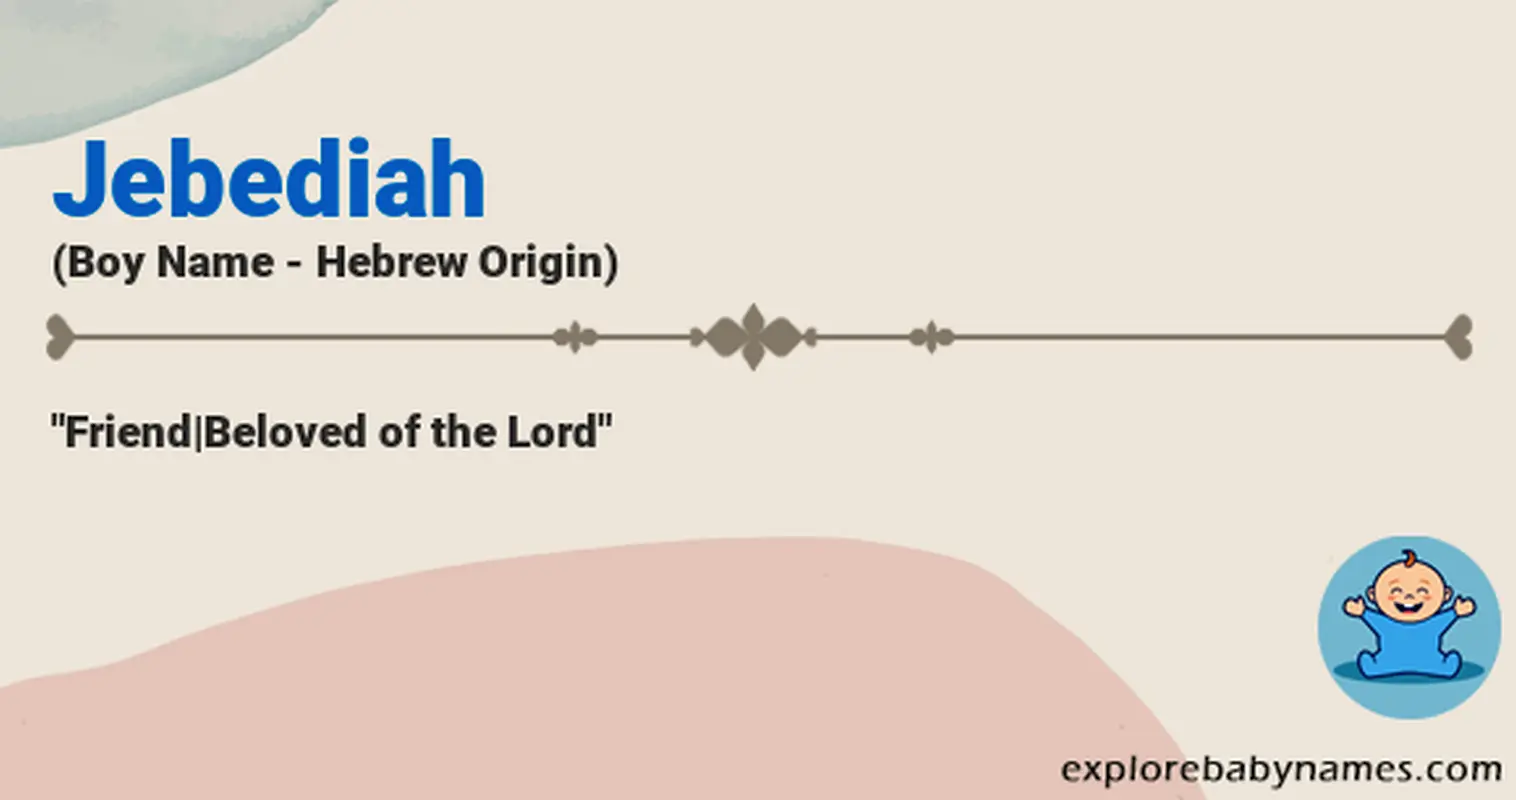 Meaning of Jebediah